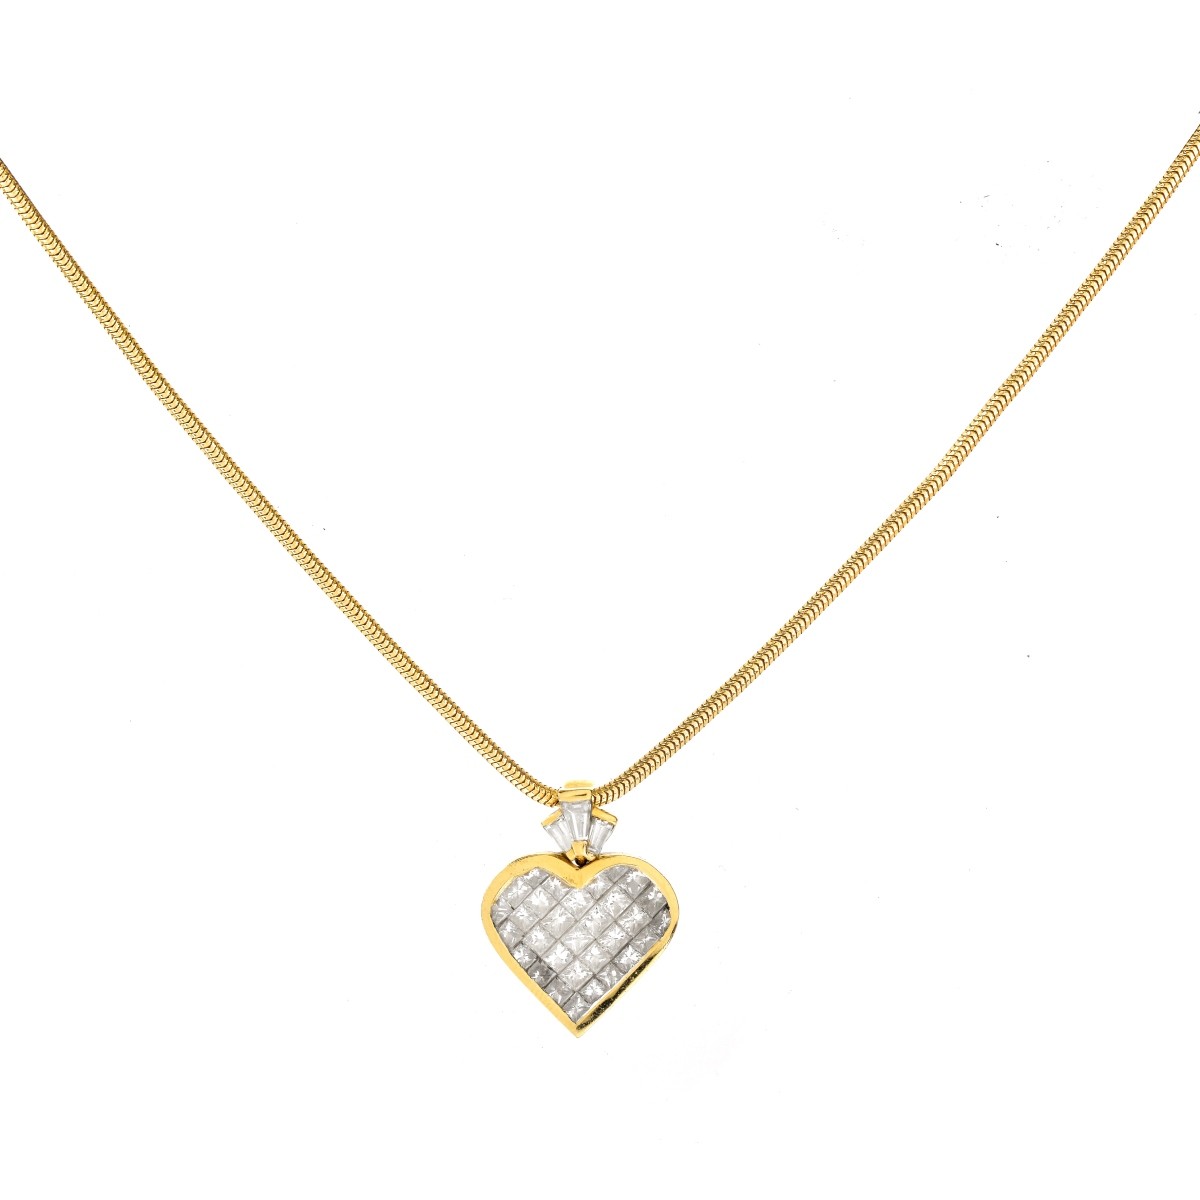 4.5-5.0ct Diamond and 18K Gold Pendant Necklace